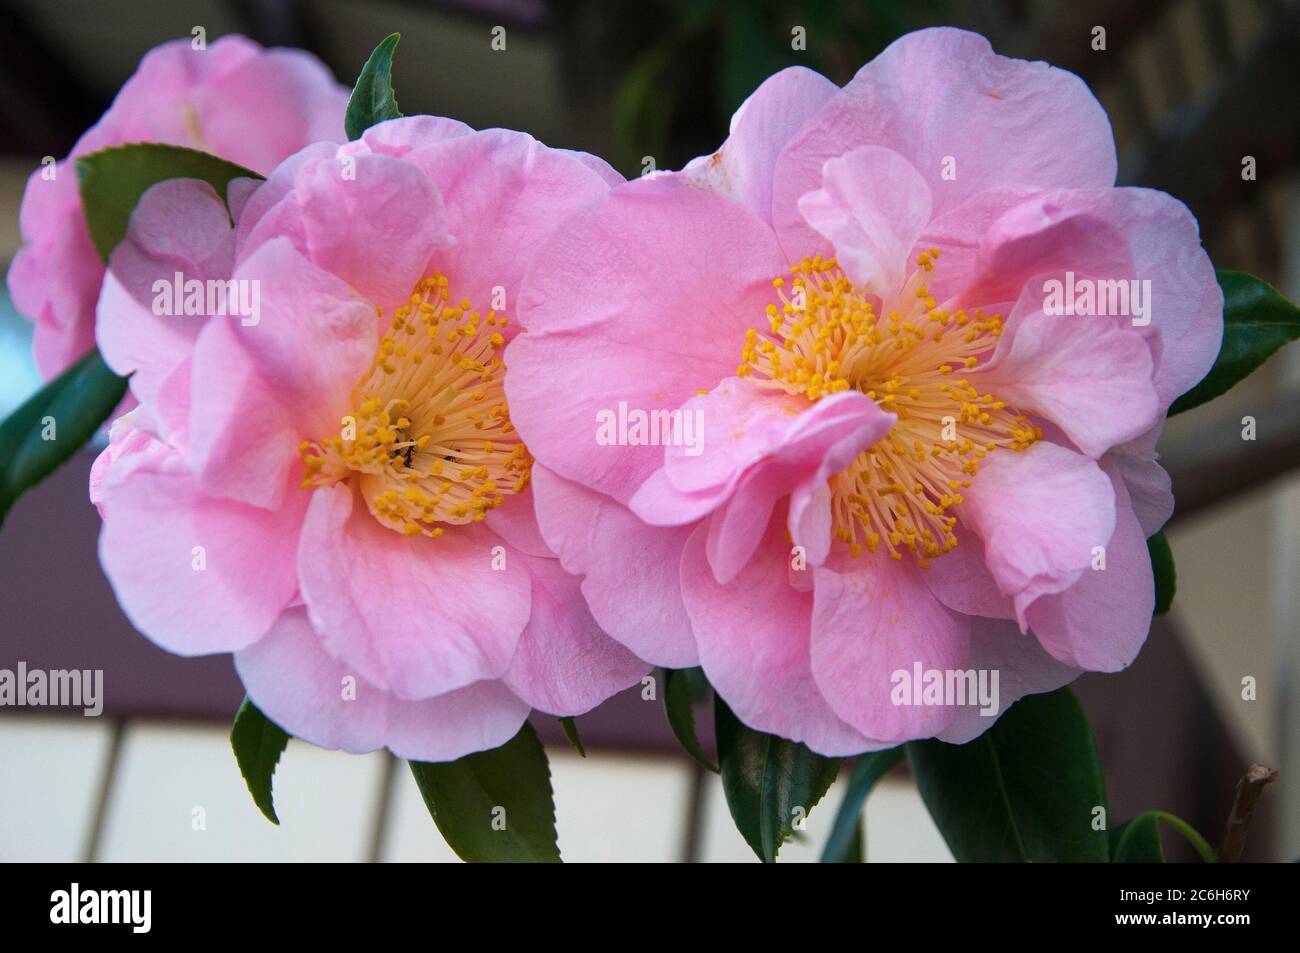 Double camellia, c. japonica, flowering in southeastern Australia, July 2020 Stock Photo